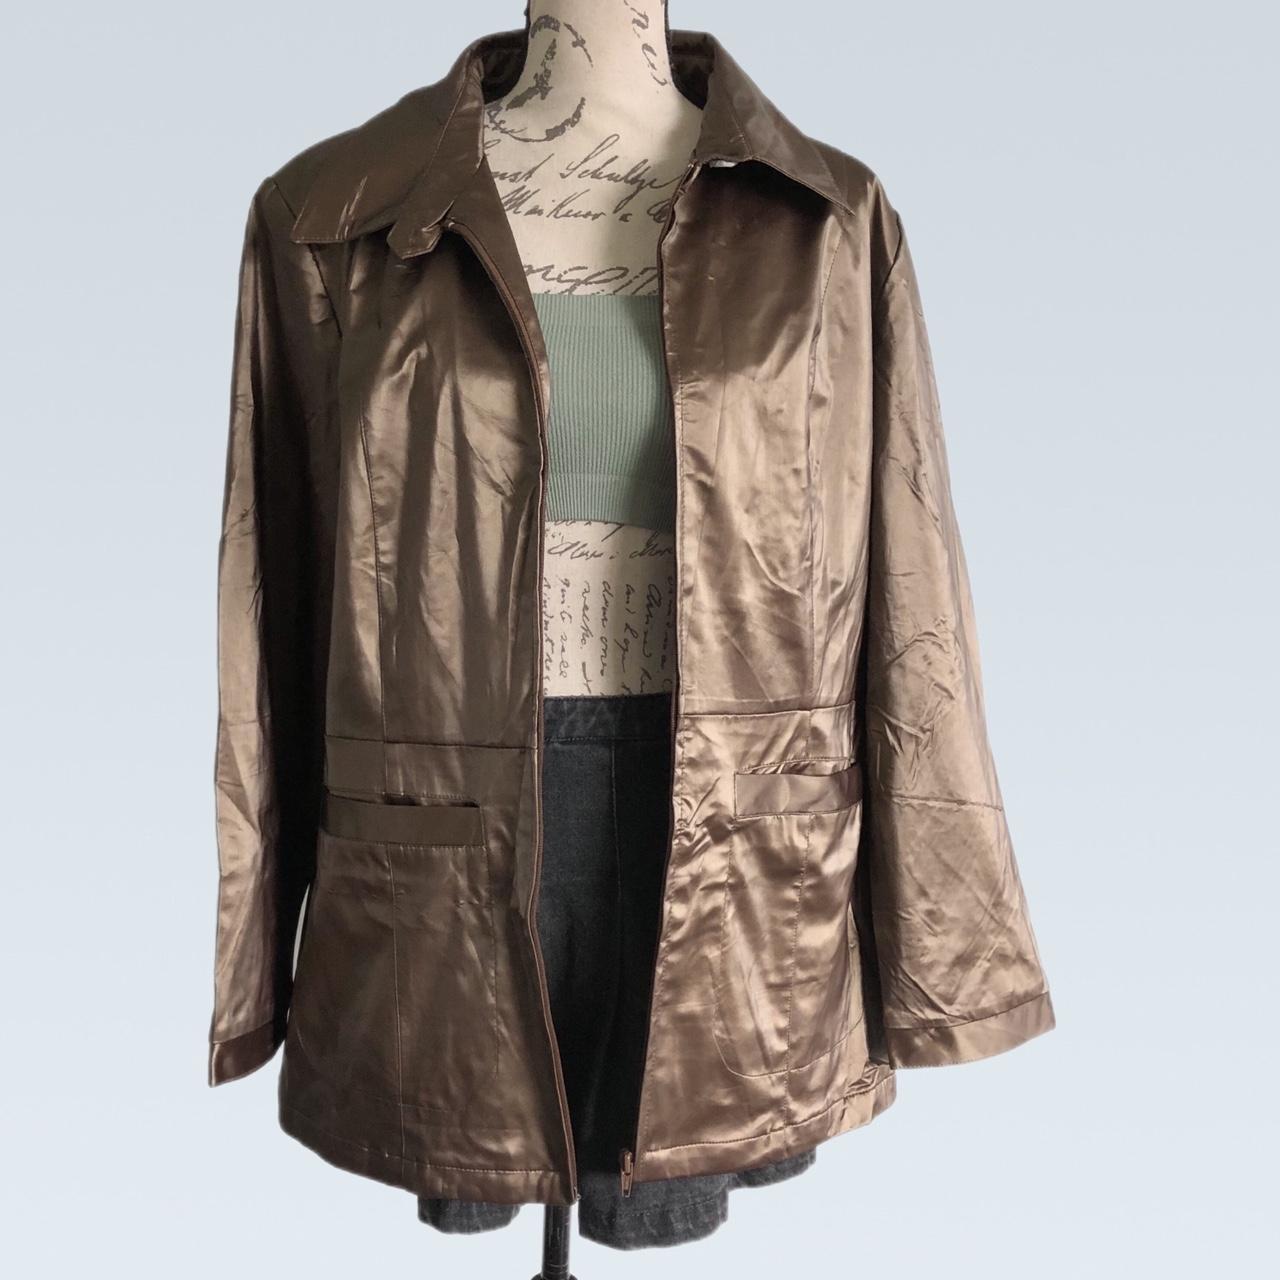 Basic Editions Women's Tan and Brown Jacket